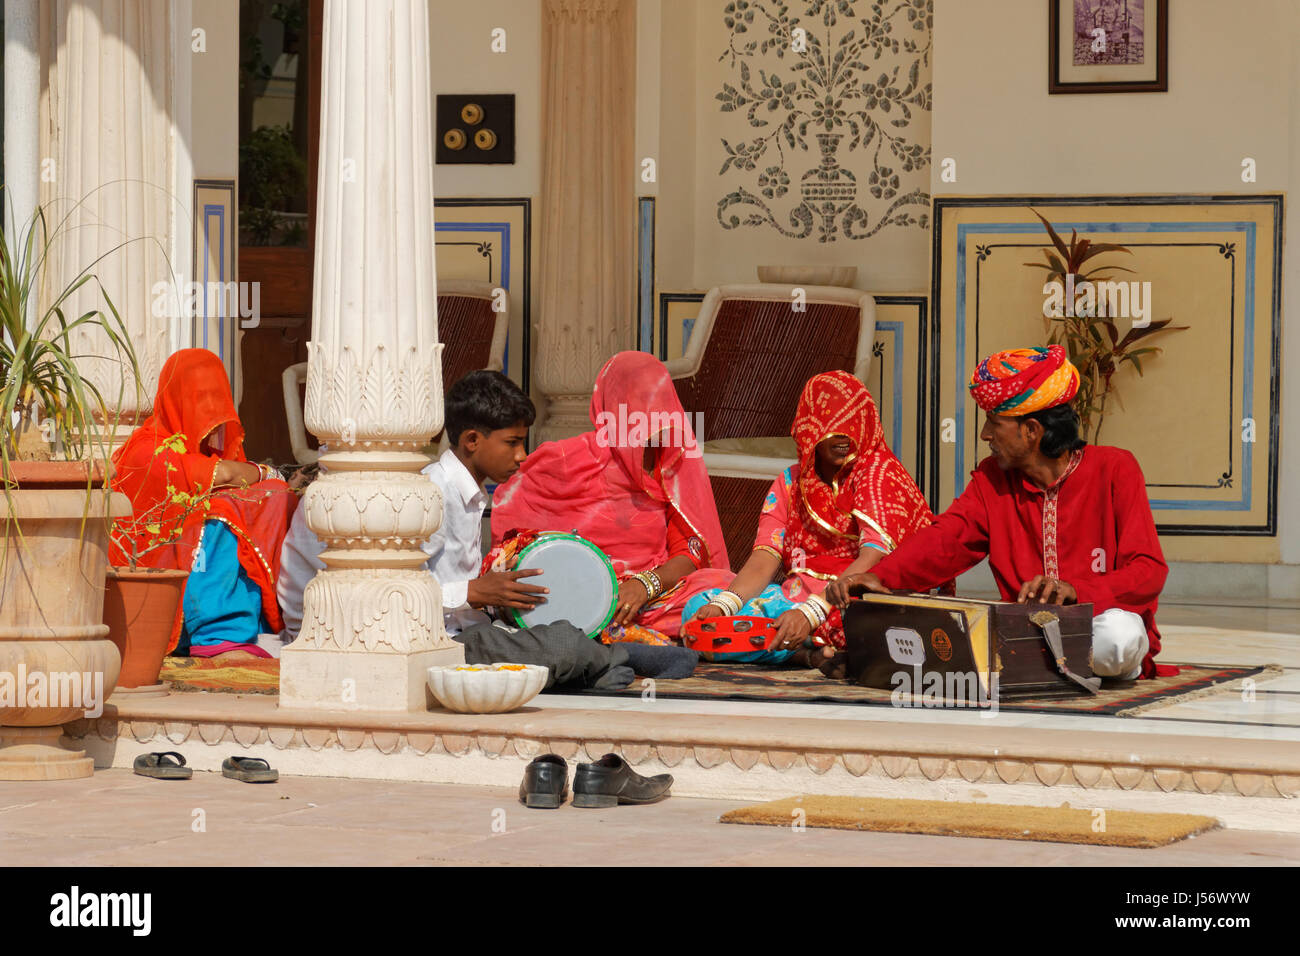 Ranthambore, India - February 7, 2015: Local musicians sit rehearsing for a wedding in a hotel in Ranthambore Stock Photo